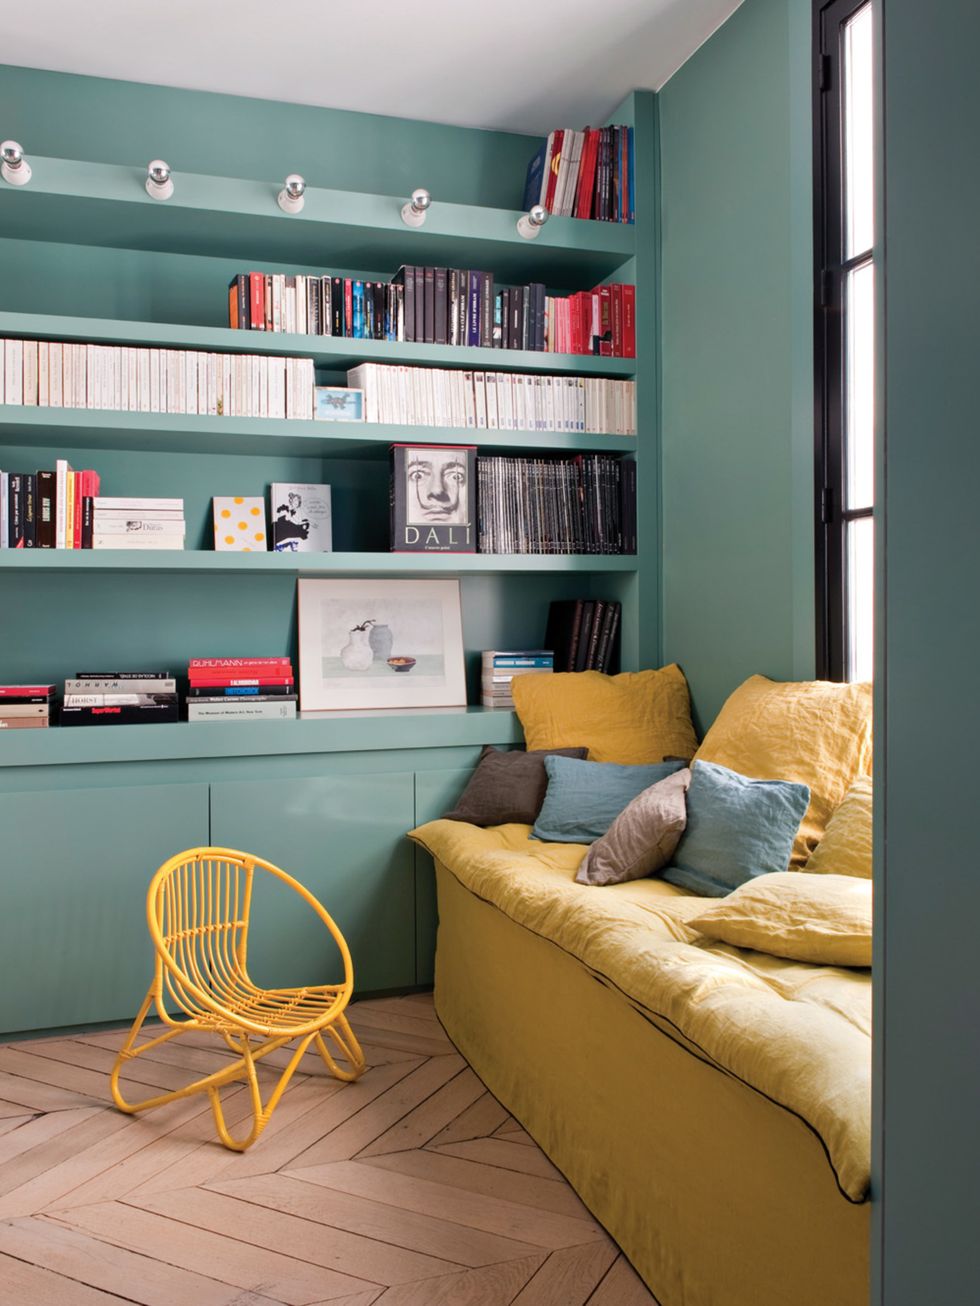 Room, Interior design, Wall, Shelf, Furniture, Shelving, Bookcase, Teal, Home, Turquoise, 